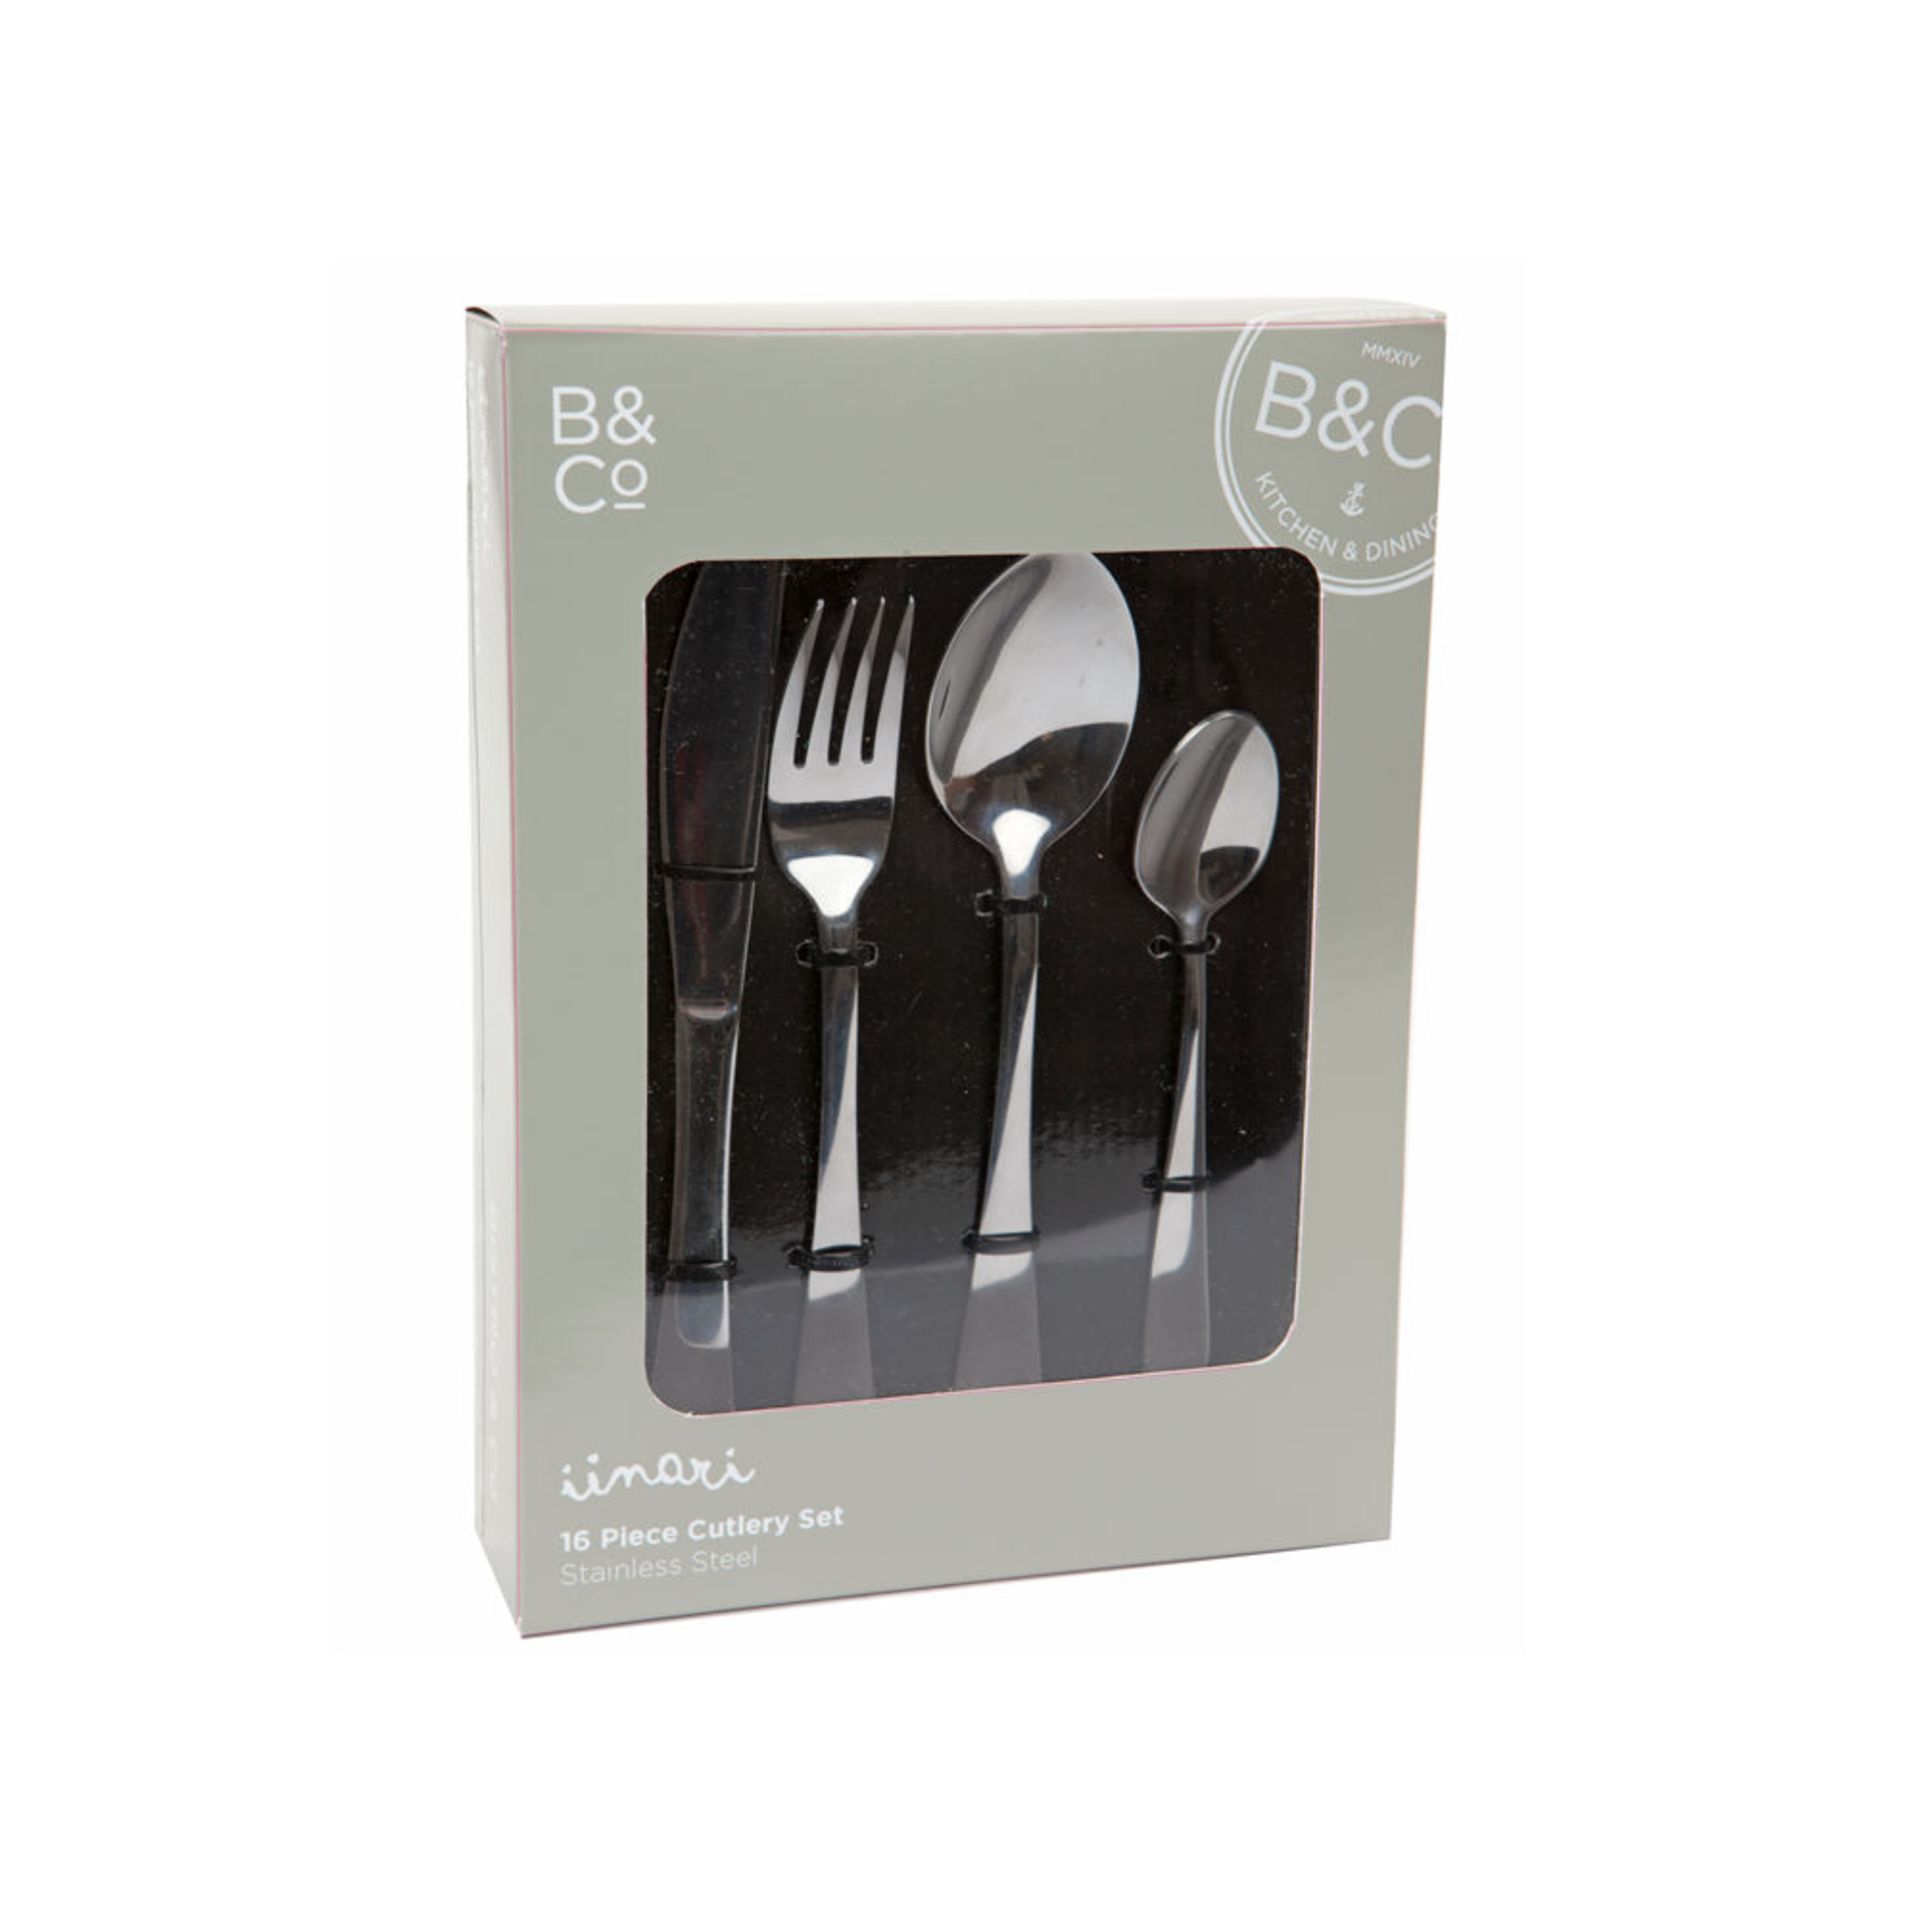 V Brand New Bistro & Co Linari 16 Piece Stainless Steel Cutlery Set